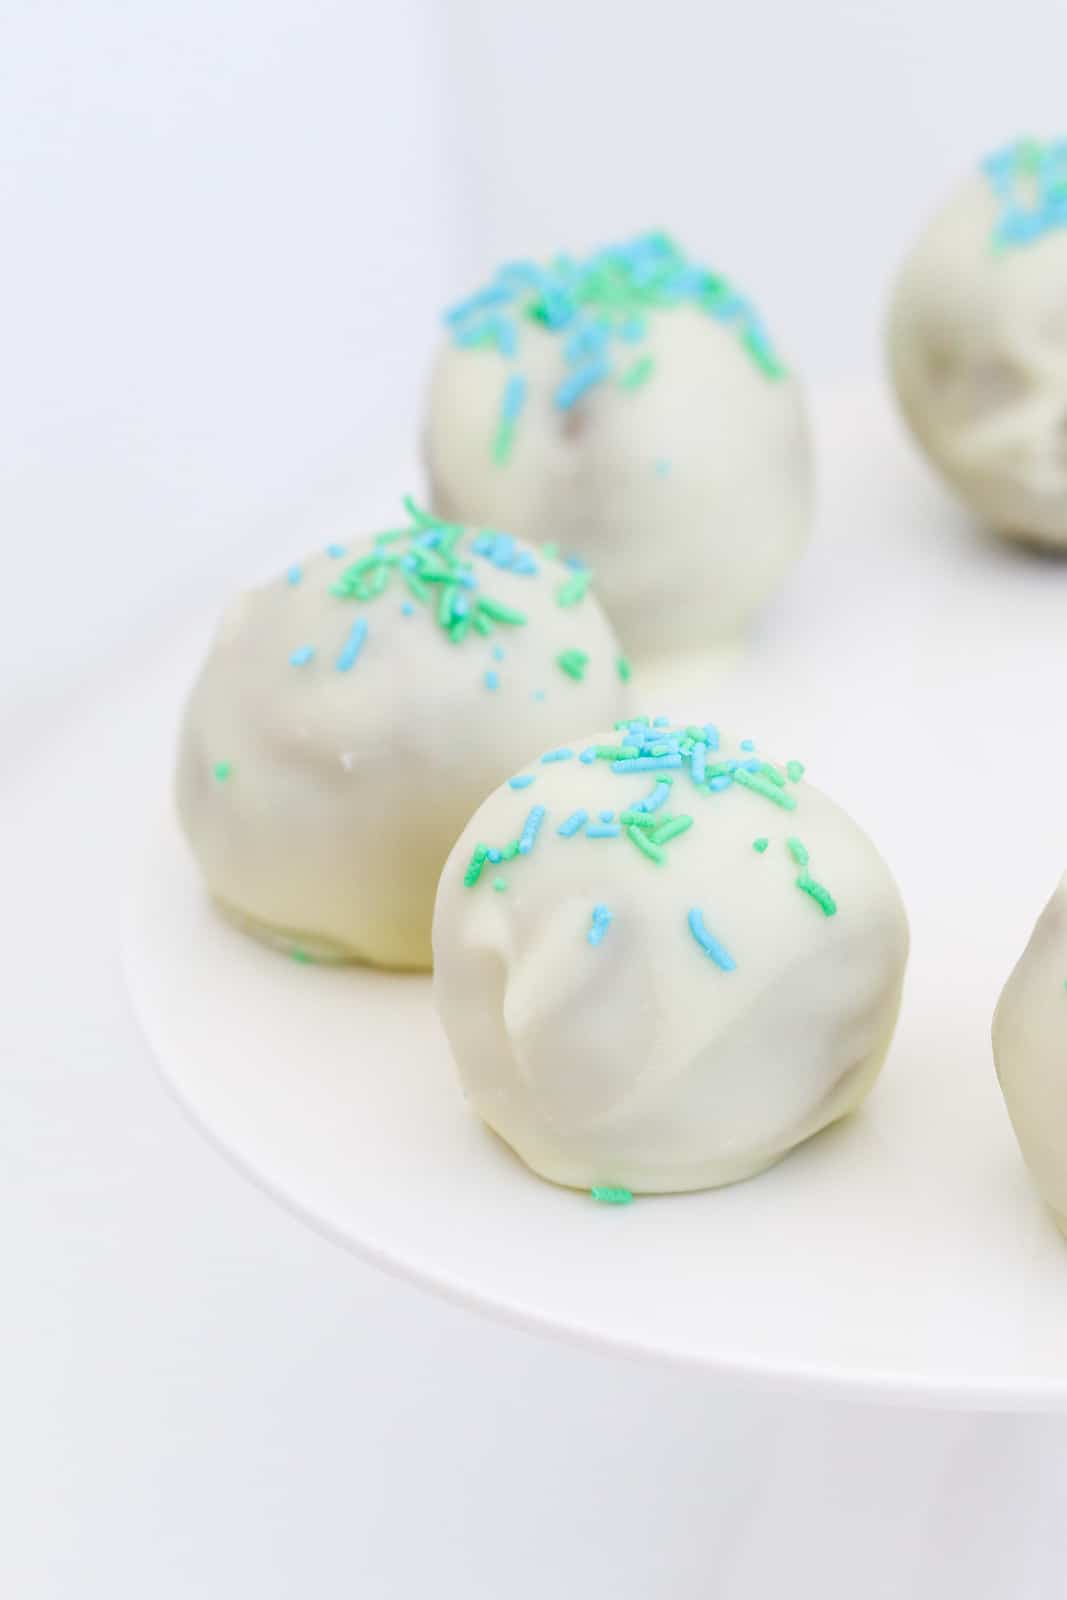 A close up of decorated white chocolate balls on a cake plate.